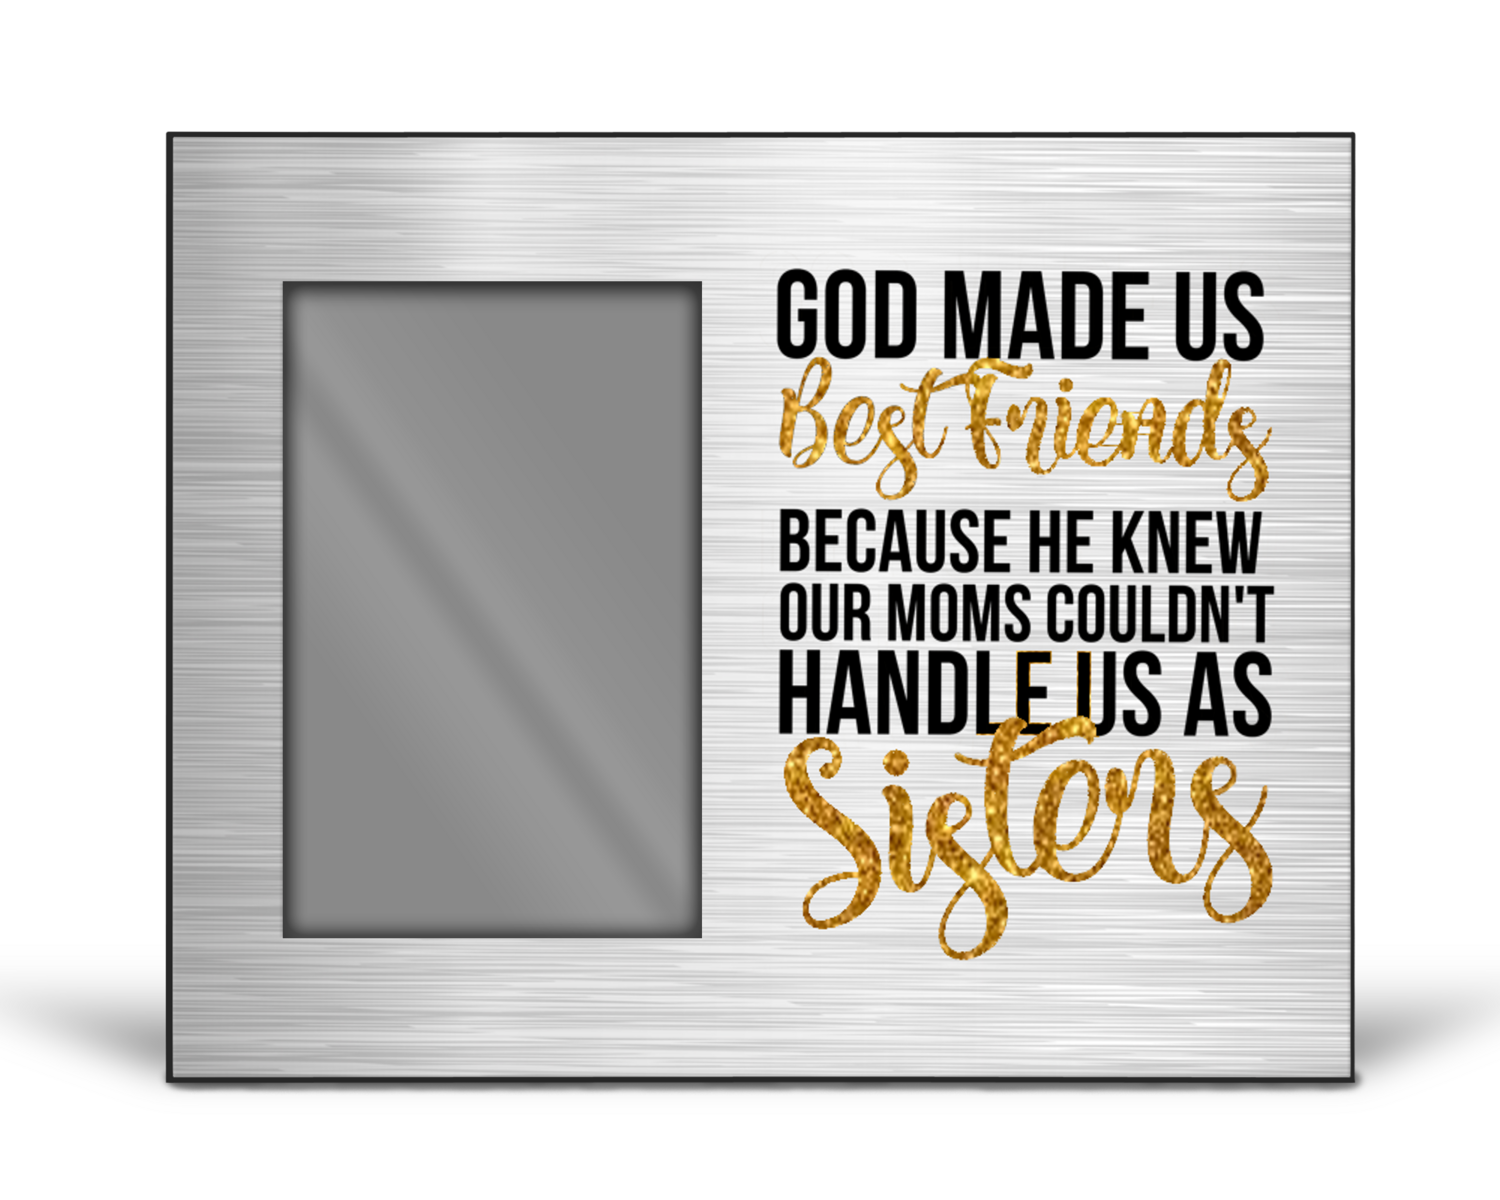 Crafting Picture Frame: GOD MADE US BEST FRIENDS BECAUSE HE KNEW OUR MOMS COULDN'T HANDLE US AS SISTERS